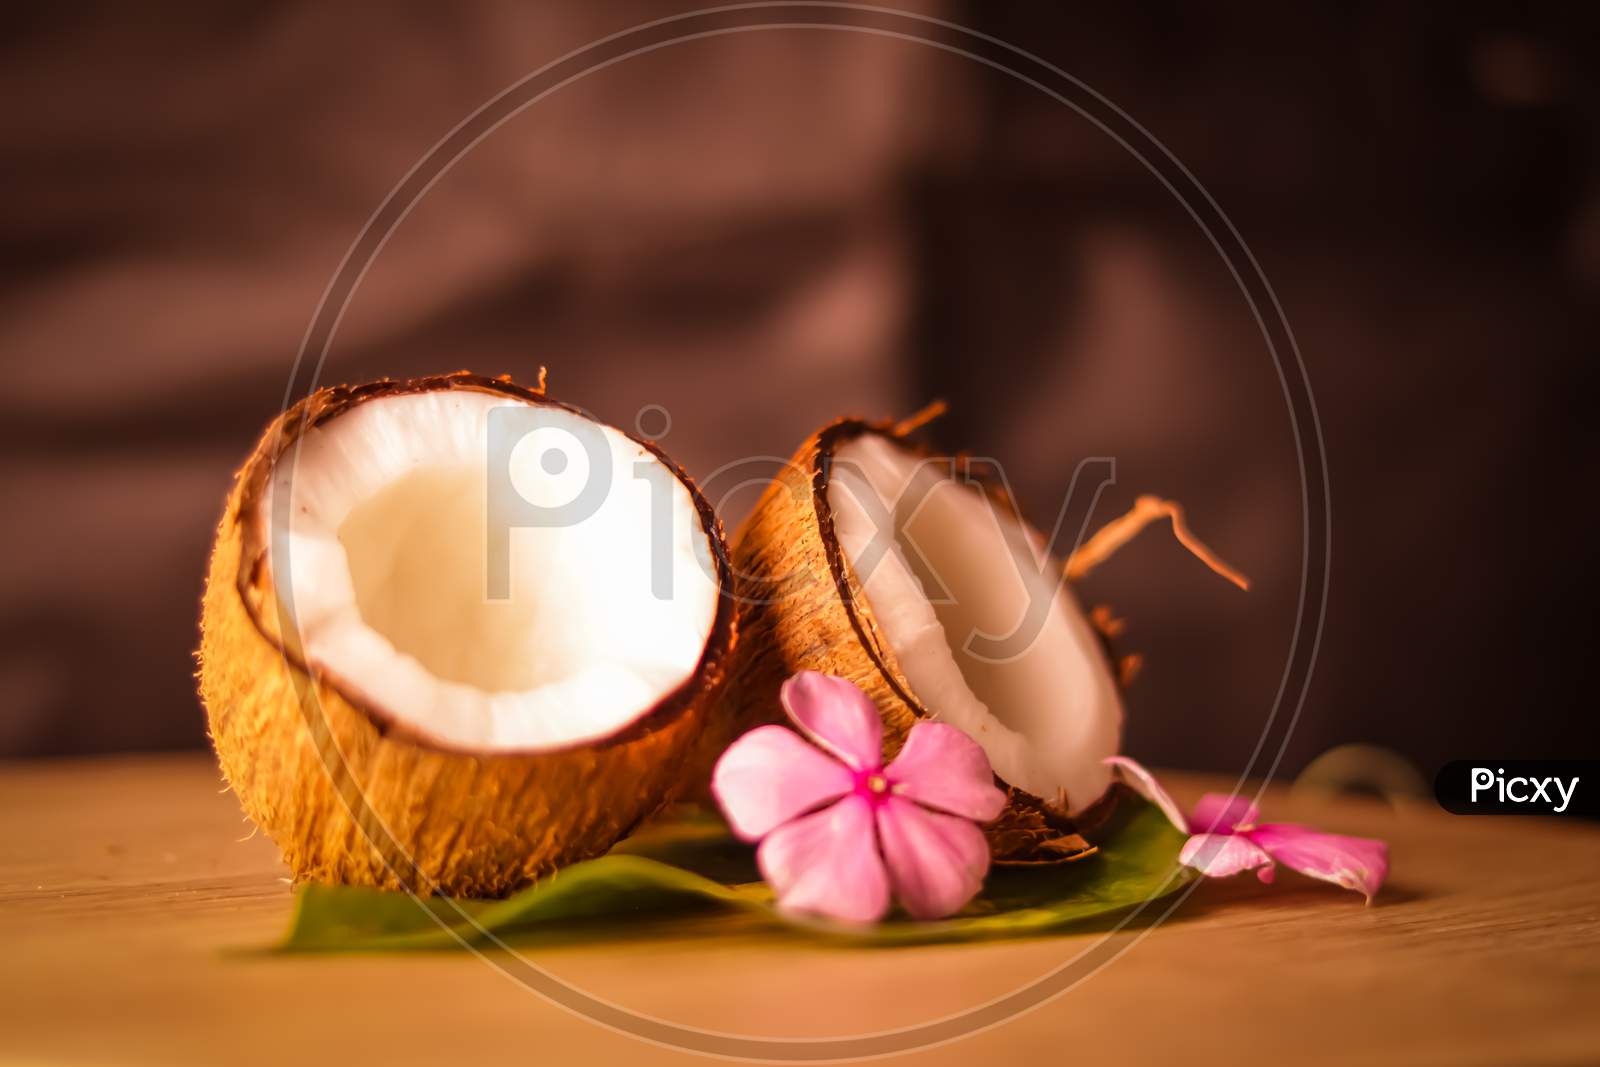 Coconut And Coconut Milk On Wooden Table,Coconut With Leaves And Flower,Glasses Of Coconut Milk,,Selective Focus On Subject,